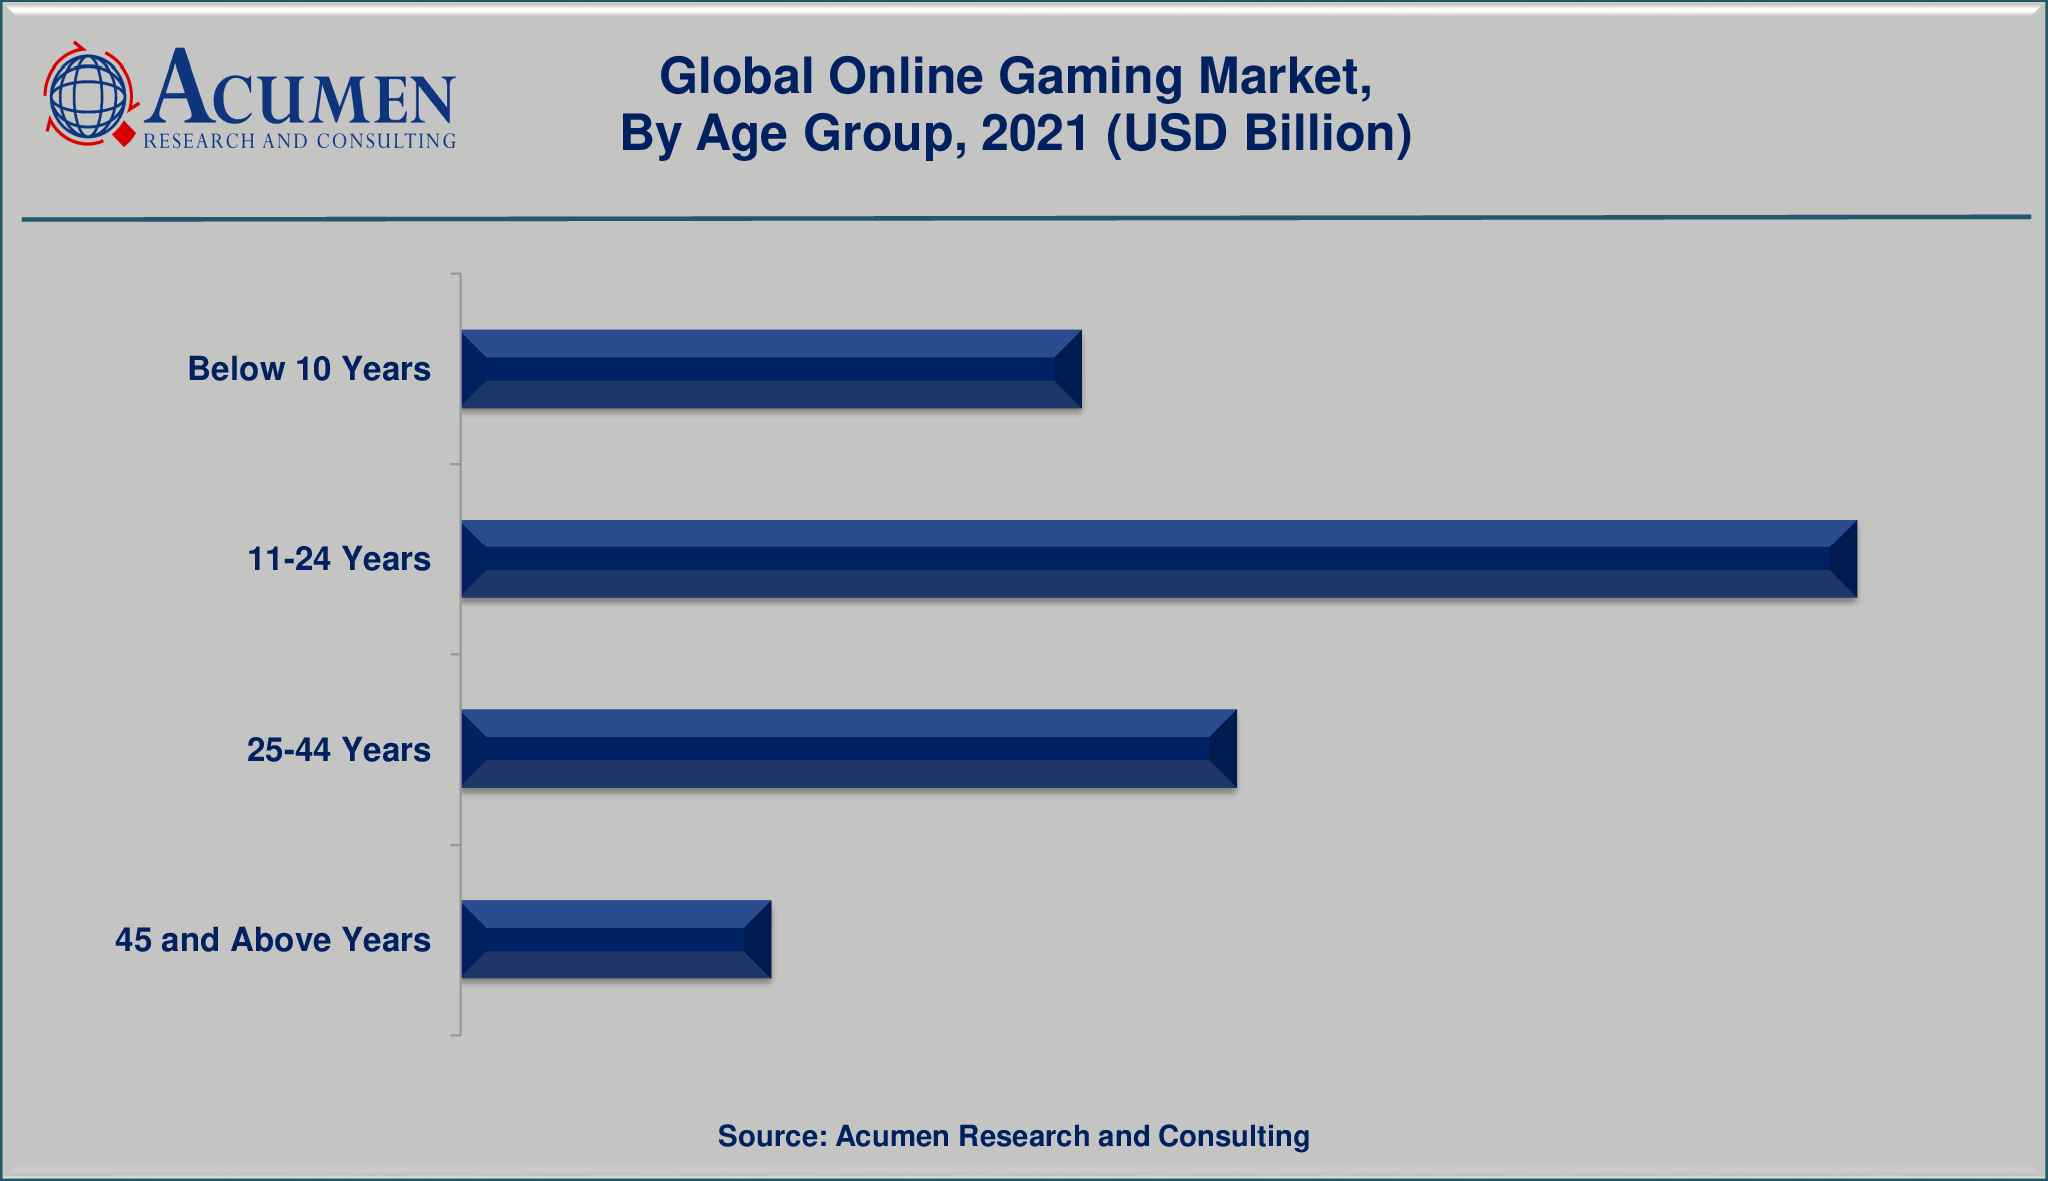 Online Gaming Market By Age Group will achieve a market size of USD 132 Billion by 2030, budding at a CAGR of 10.2%